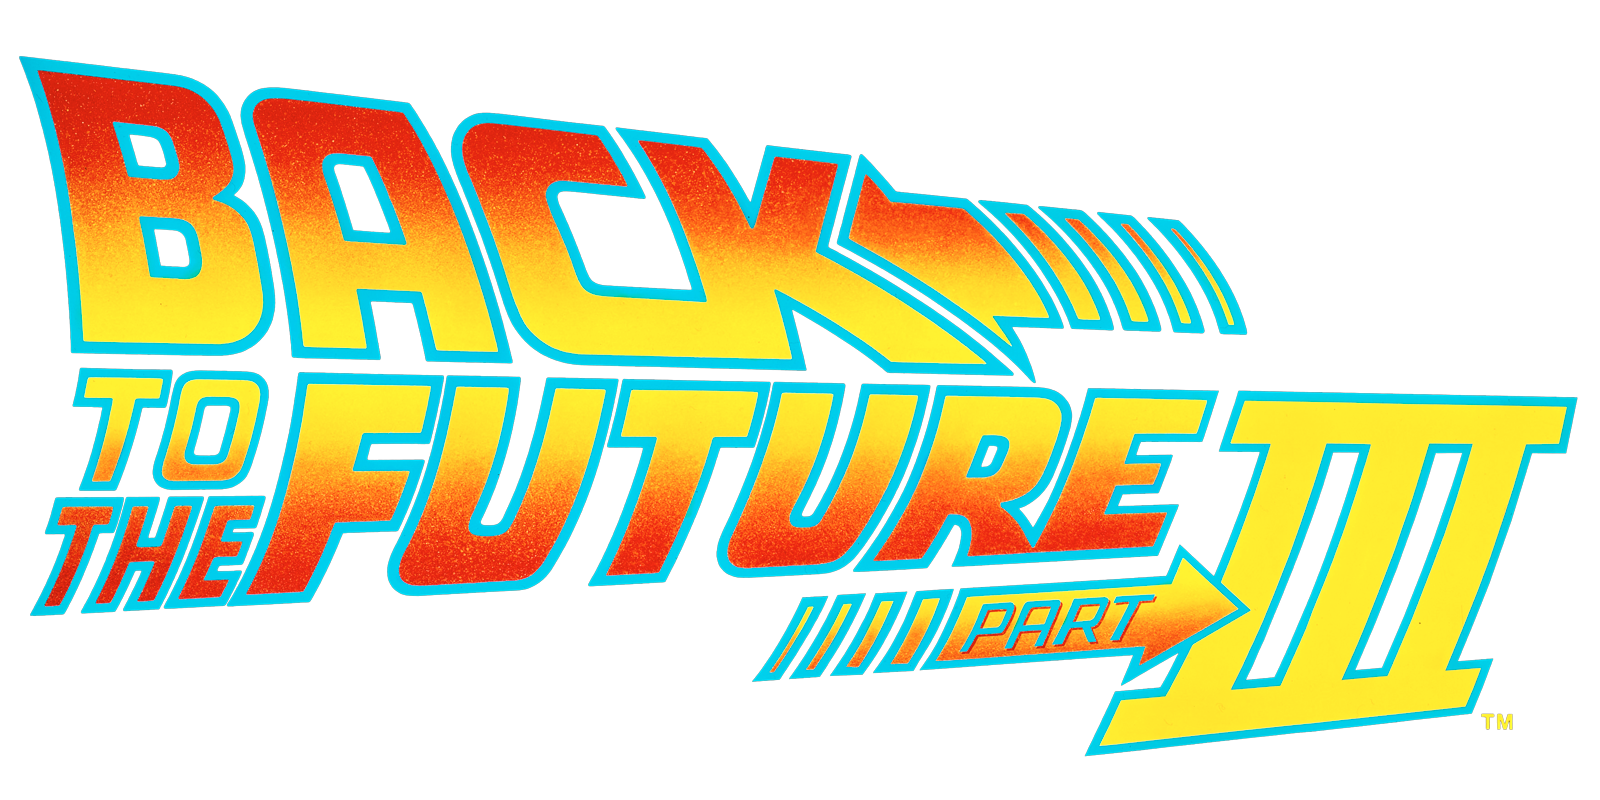 back to the future 3 full movie free